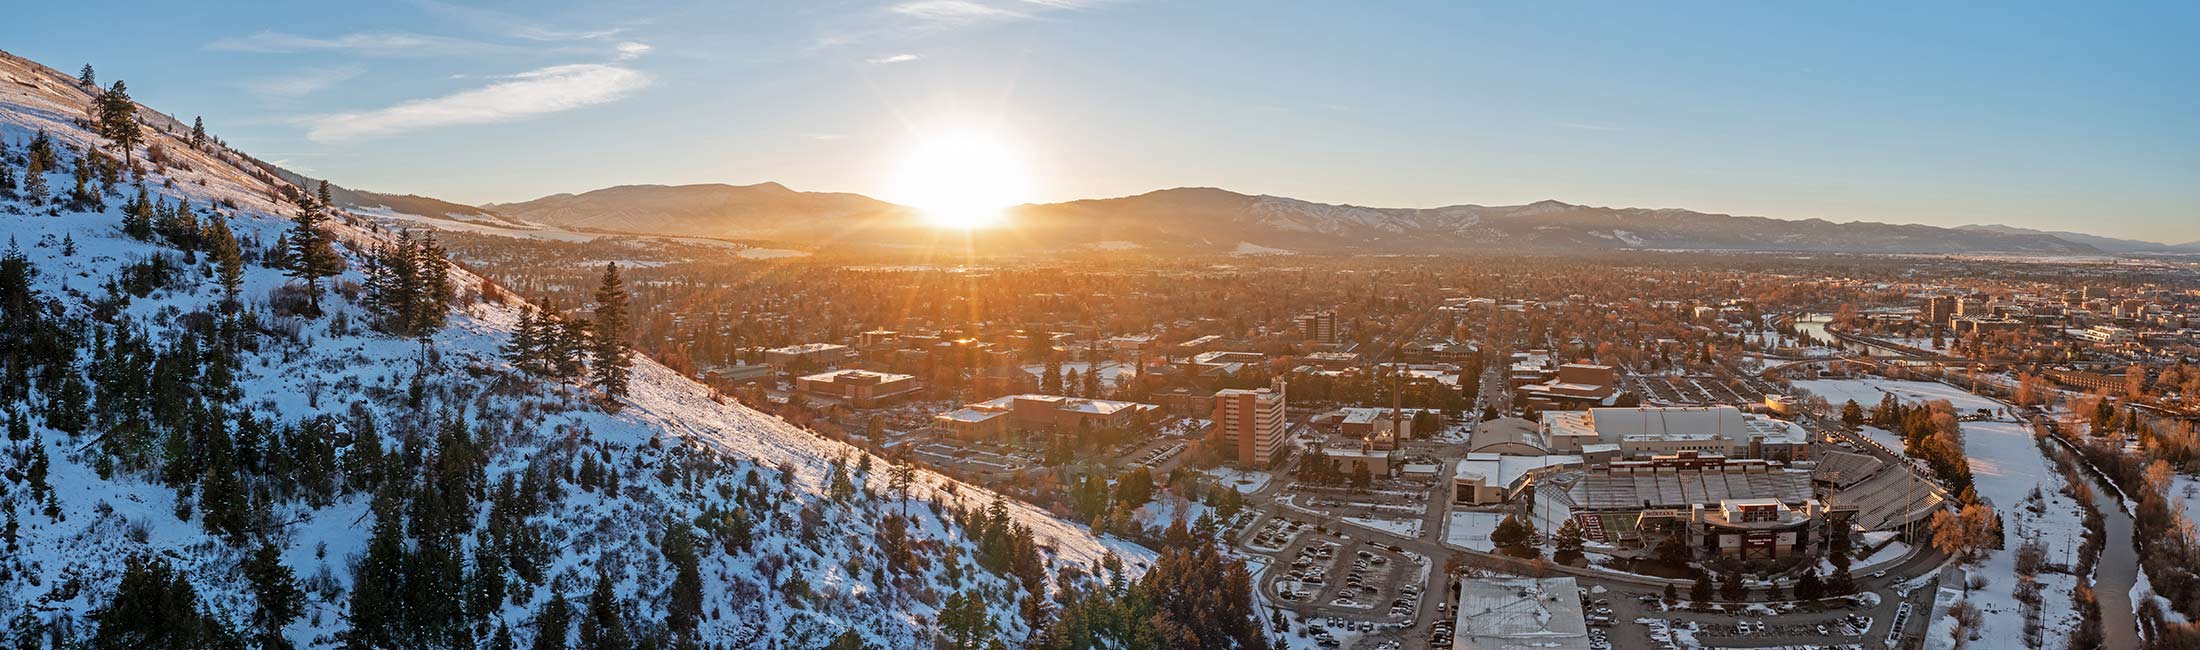 Winter Itineraries for a Weekend in Missoula